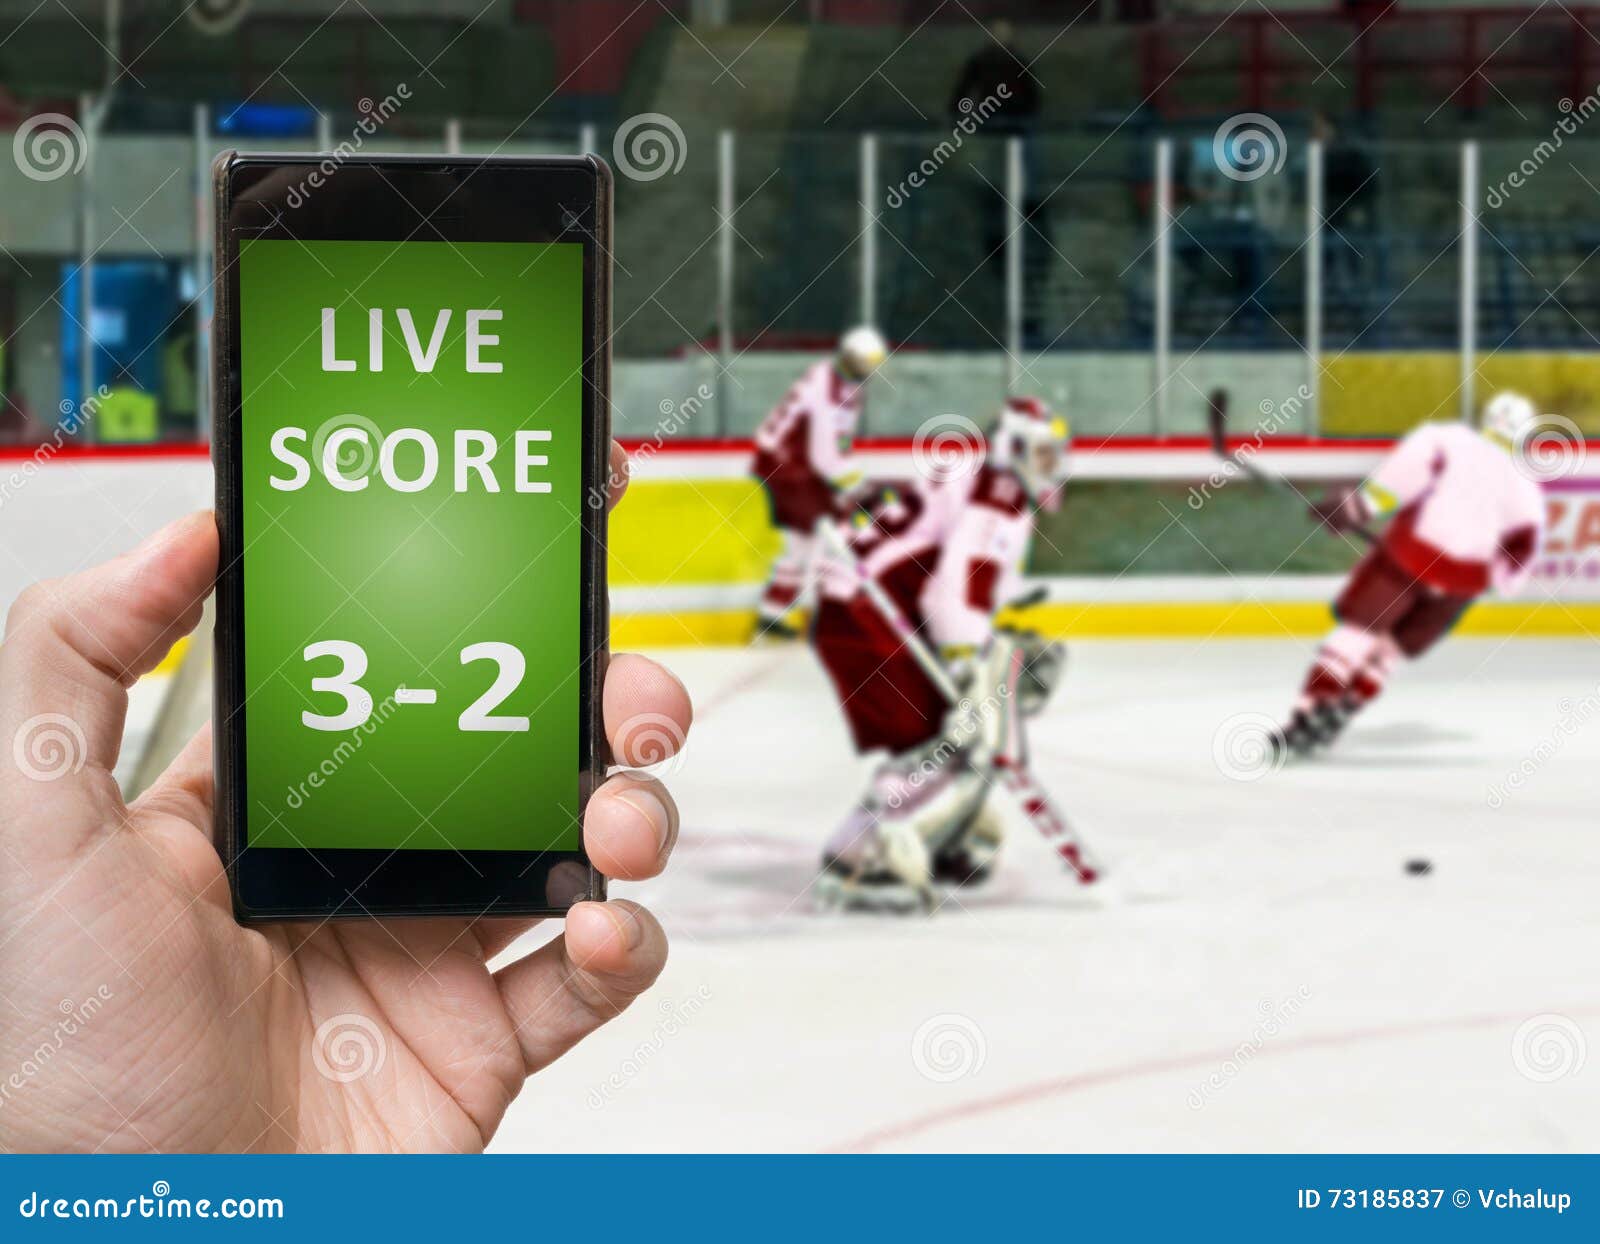 Man is Watching Ice Hockey and Holds Smartphone in Hand with Live Score Stock Image